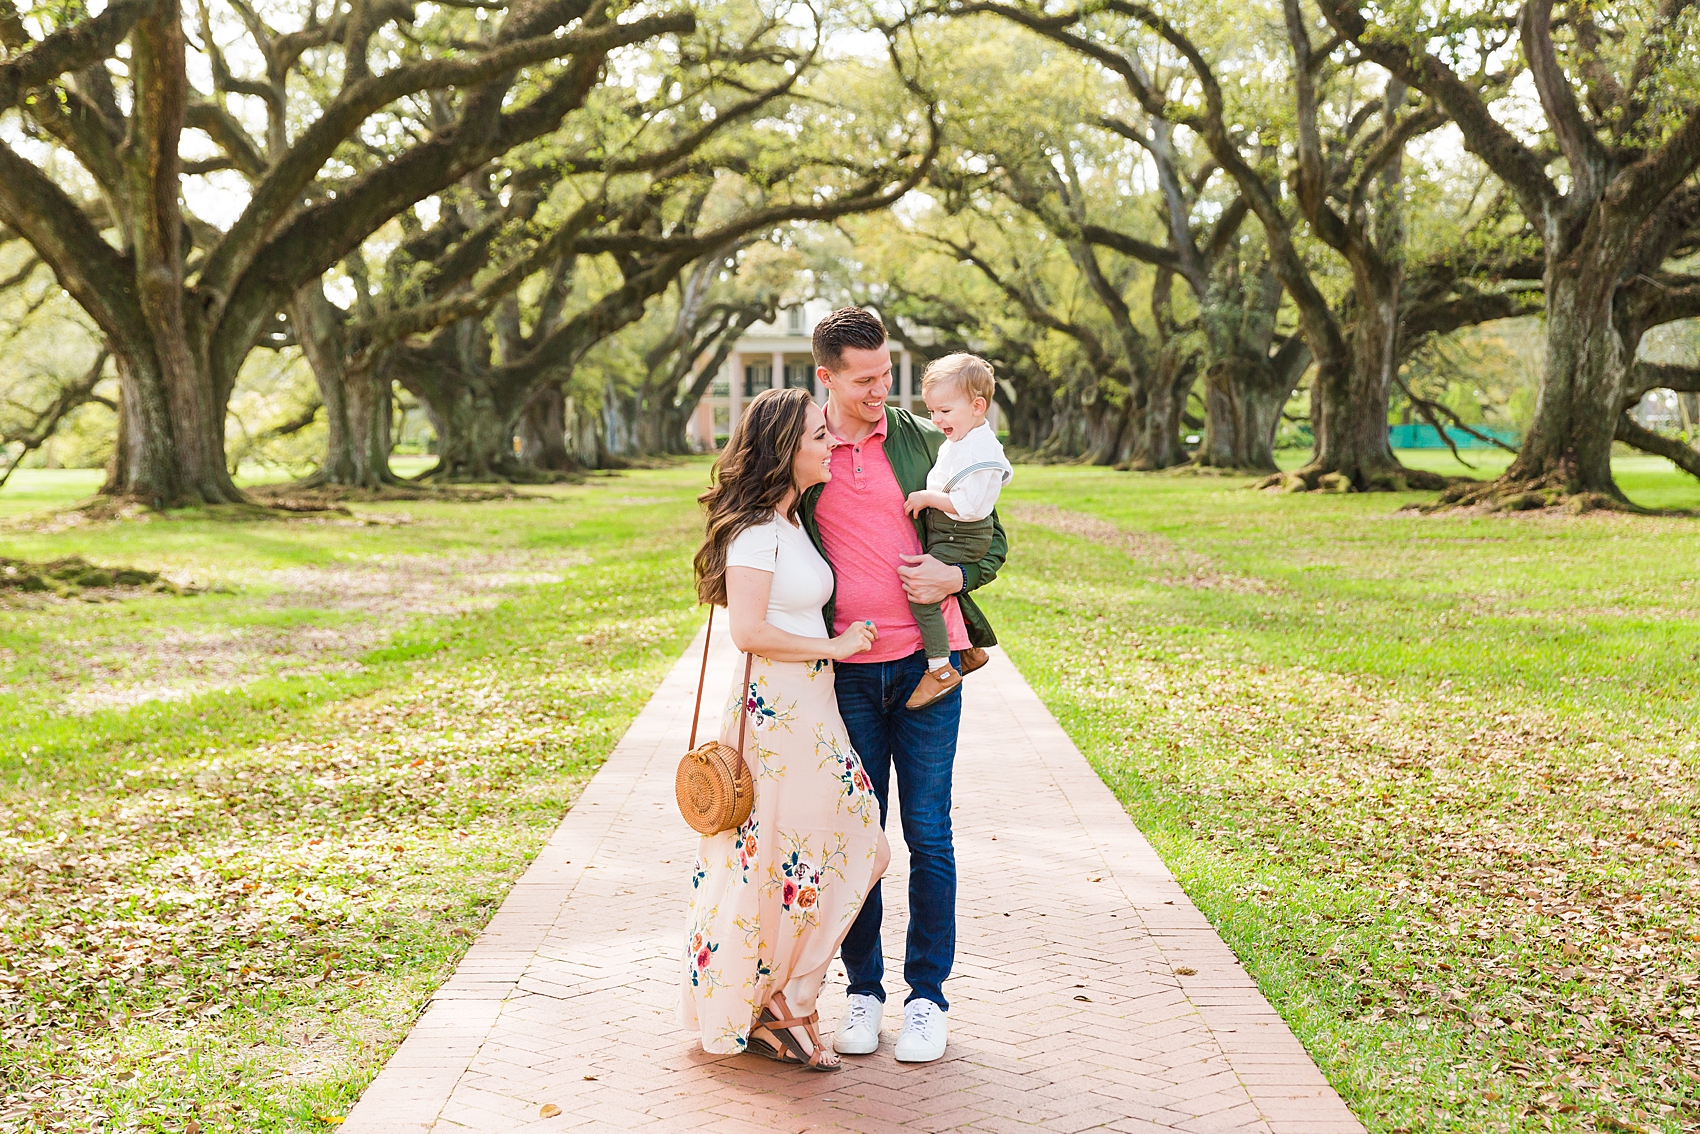 Leah Hope Photography | Scottsdale Phoenix Arizona Photographer | Traveling New Orleans Louisiana | Oak Alley Plantation | Tree Lined Plantation | Family Pictures | Family Photos | What to Wear | New Orleans Lafayette Cemetery | NOLA 